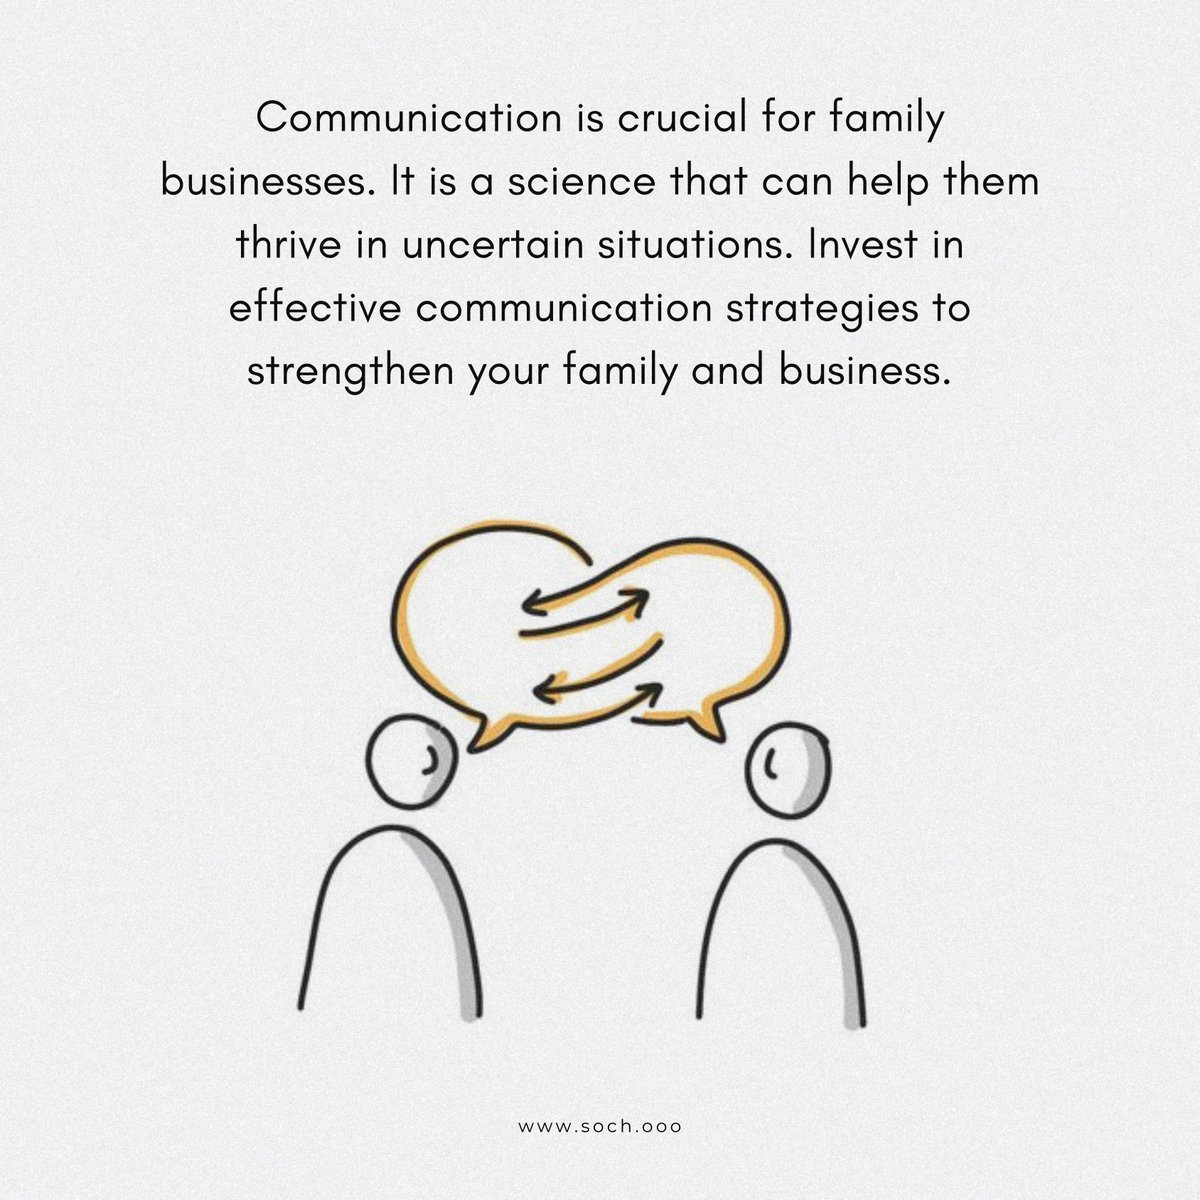 Don’t just see communication as one time thing or something that is essential.

For family businesses, it is critical to see communication as the linchpin to harmony, prosperity and love.
#familybusiness #communicationiskey #harmonyathome #prosperityforall